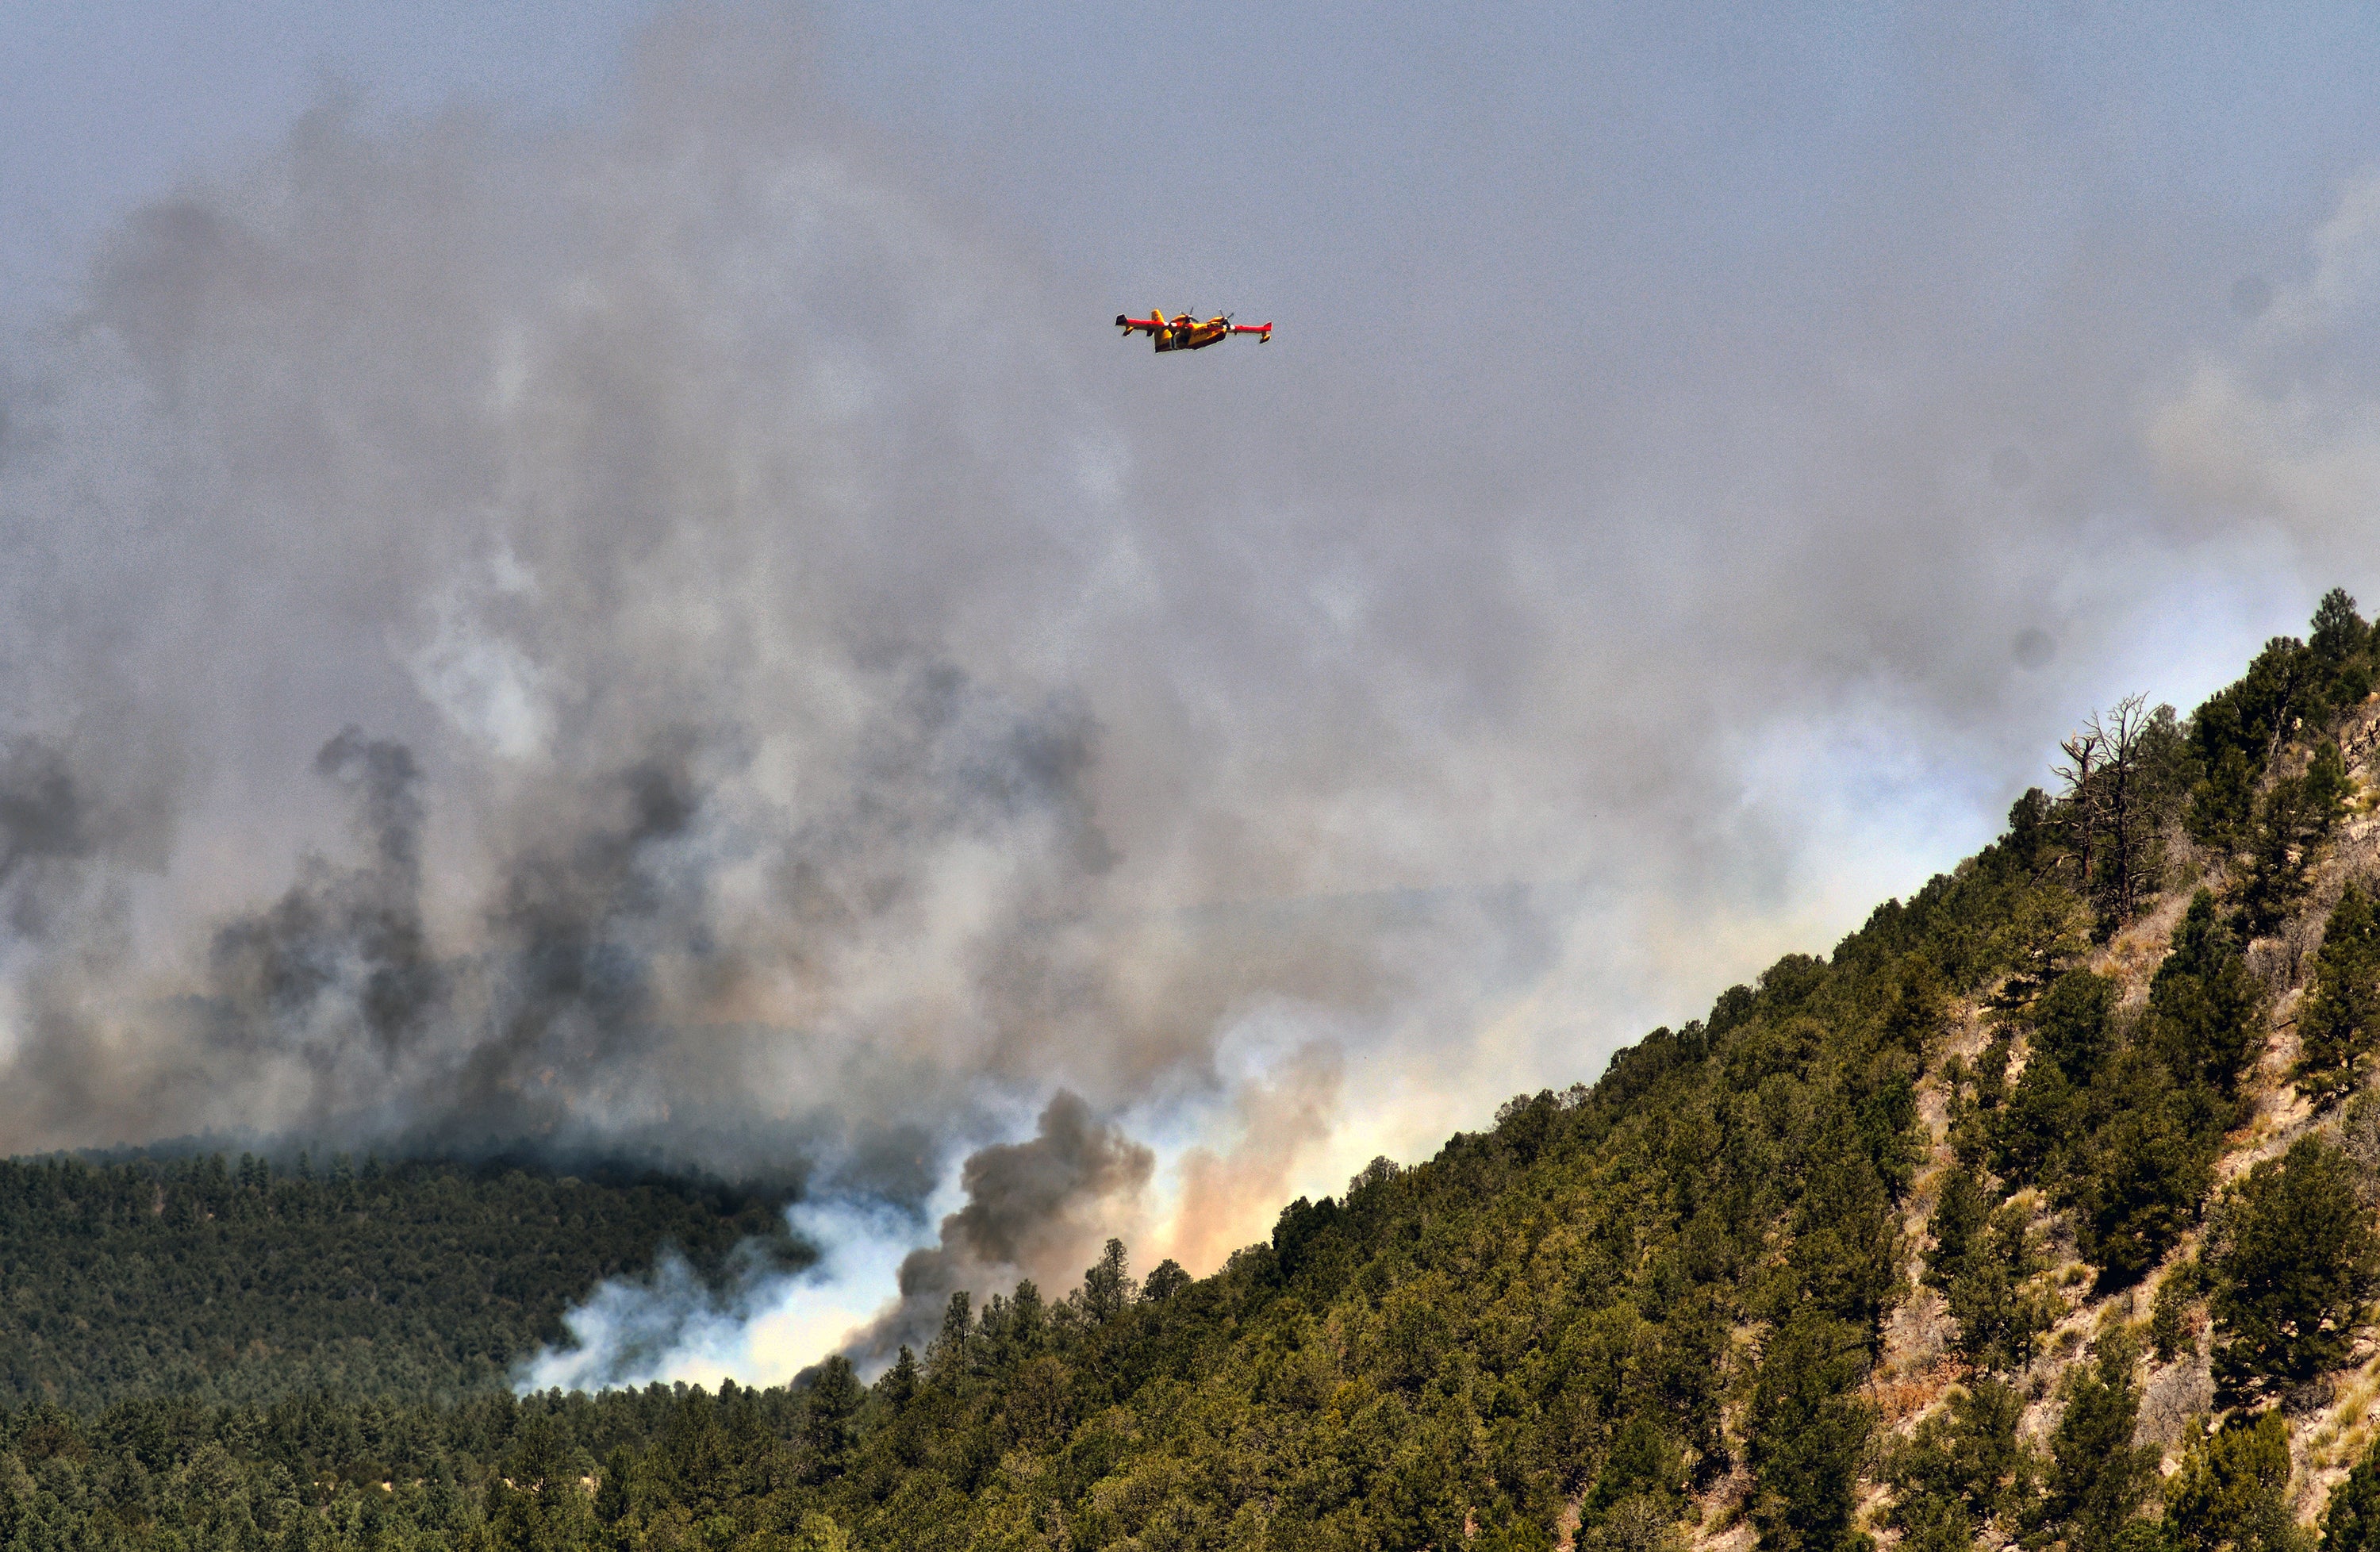 A firefighting plane flew over the fire near Las Vegas, NM on May 4. (Photo: Thomas Peripert, AP)